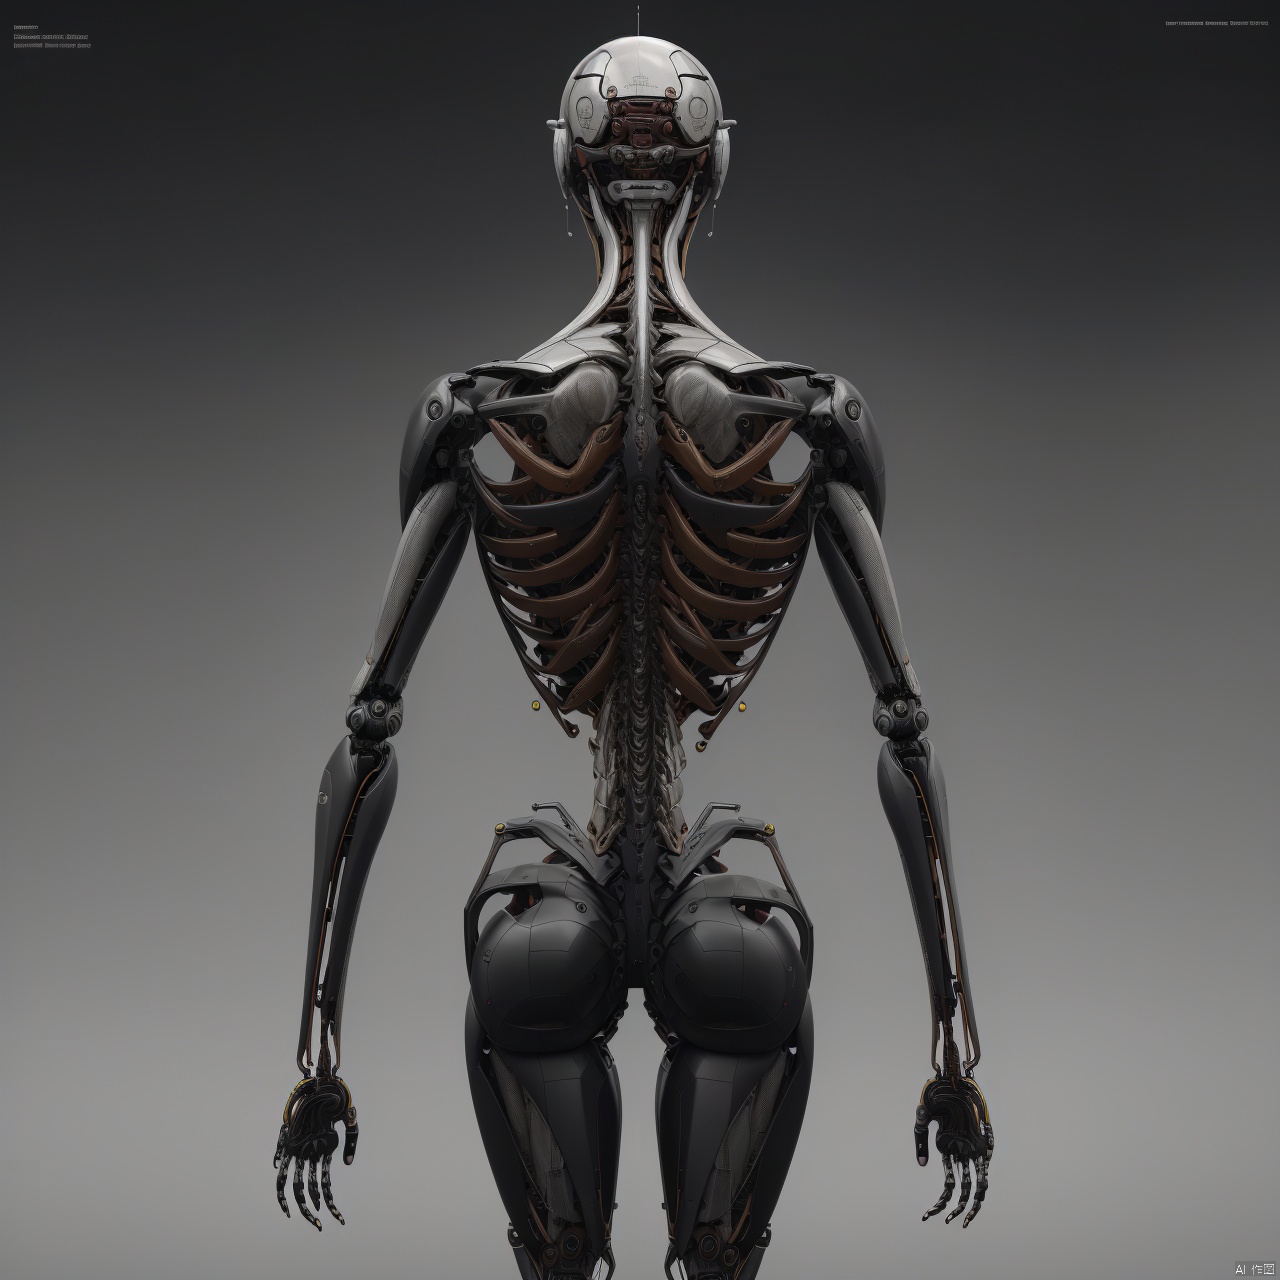 grey background, english text, no humans, watermark, robot, mecha, science fiction, realistic, skeleton, non-humanoid robot, spine